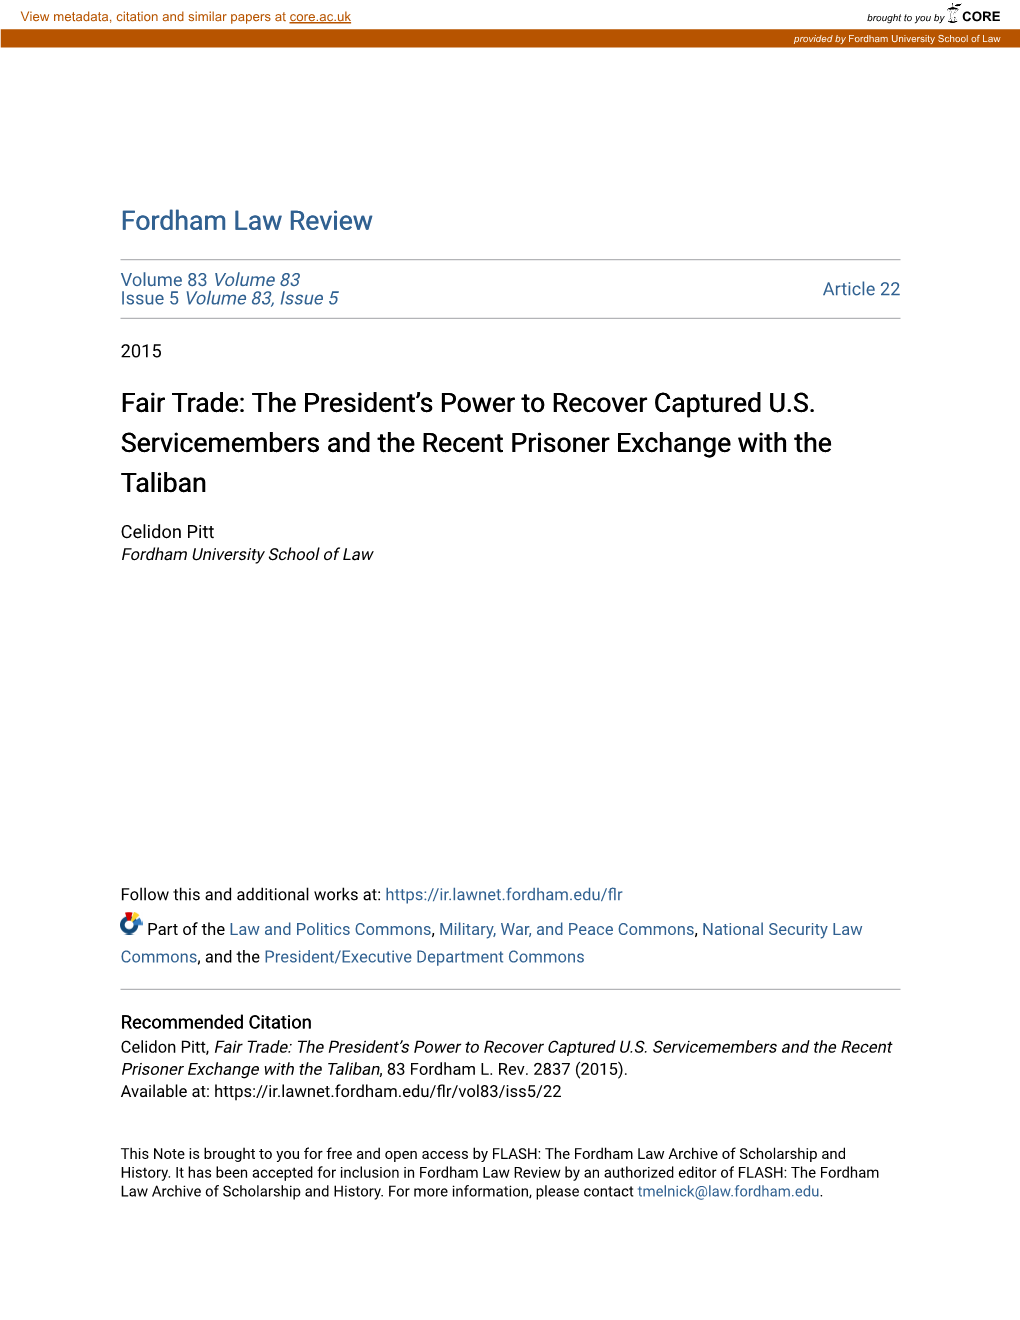 Fair Trade: the President's Power to Recover Captured U.S